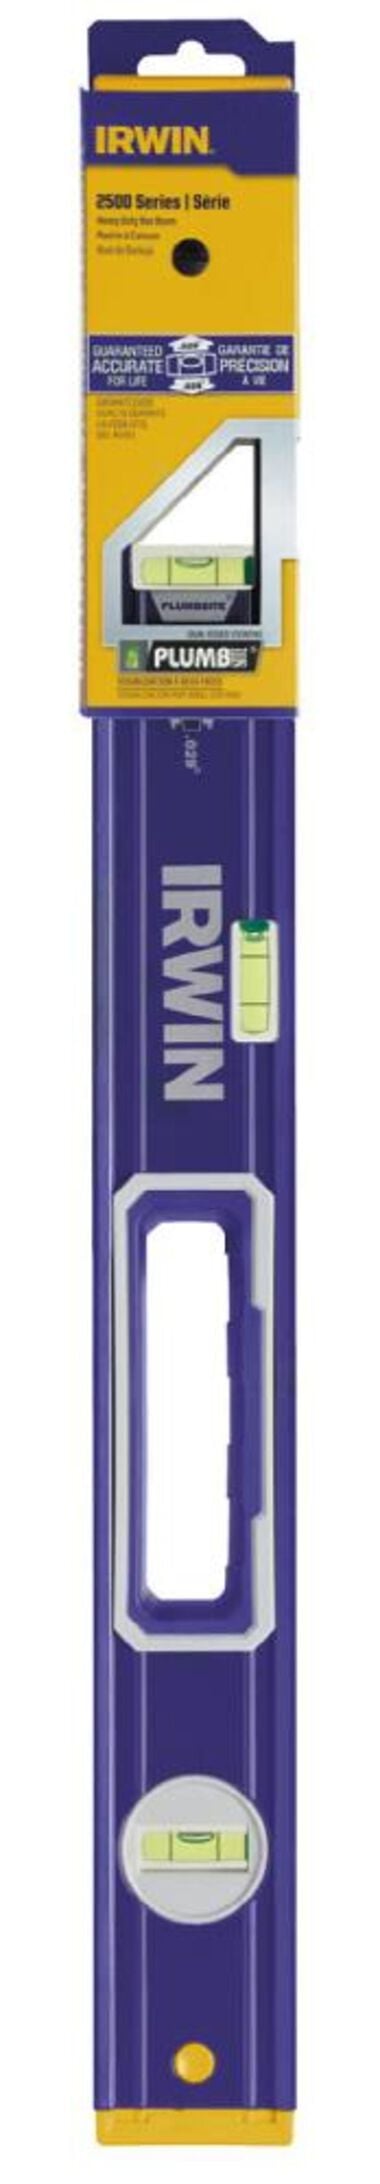 Irwin 24 In. 2500 Box Beam Level, large image number 0